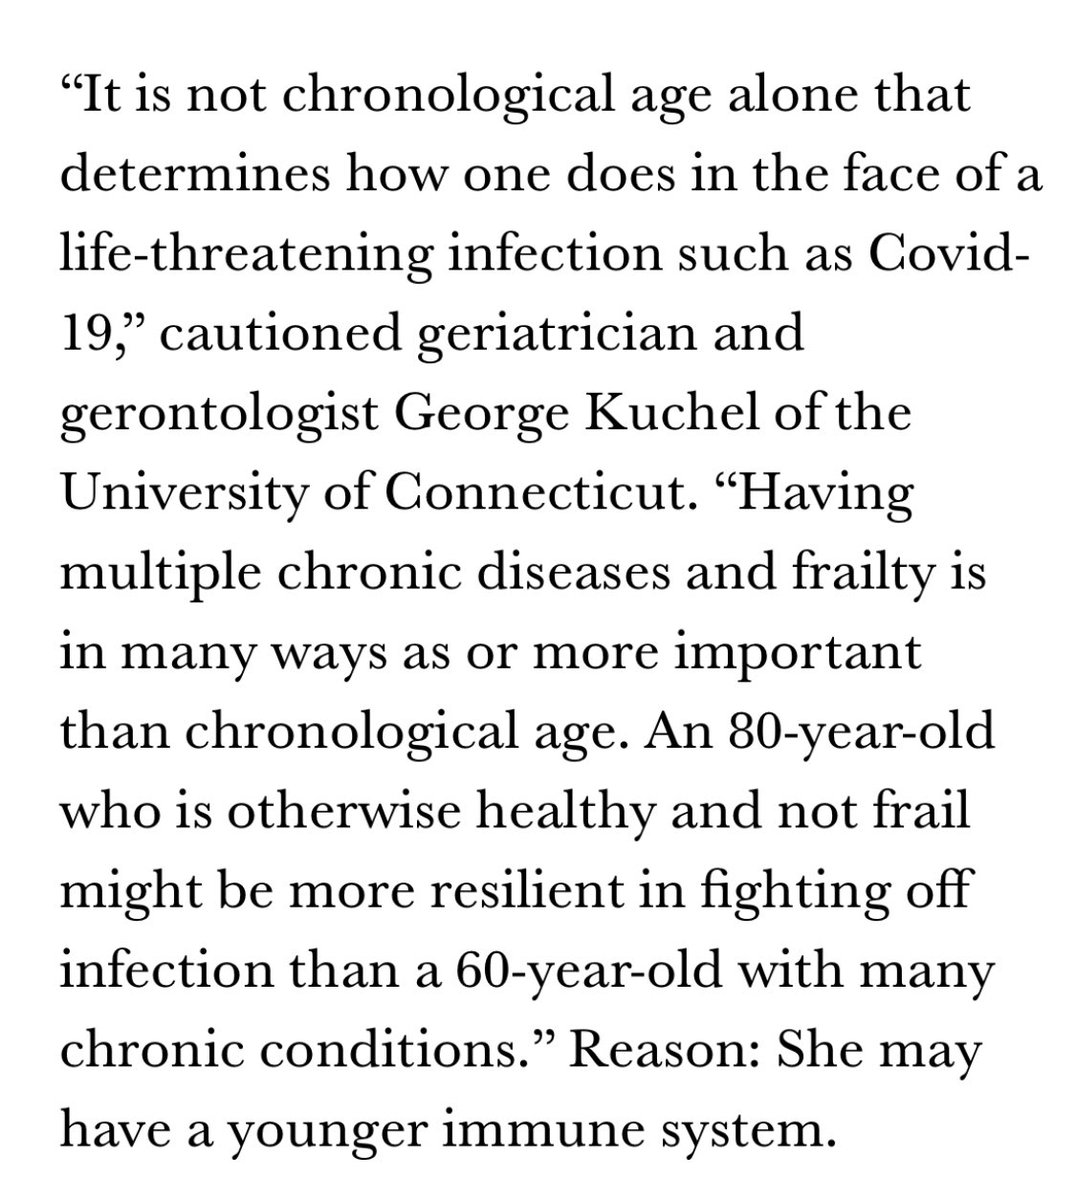 One issue of course is that we don’t all age the same way. Our bodies and our immune systems devolve based on other factors. And those factor start to hit us pretty hard at age 50. 9/